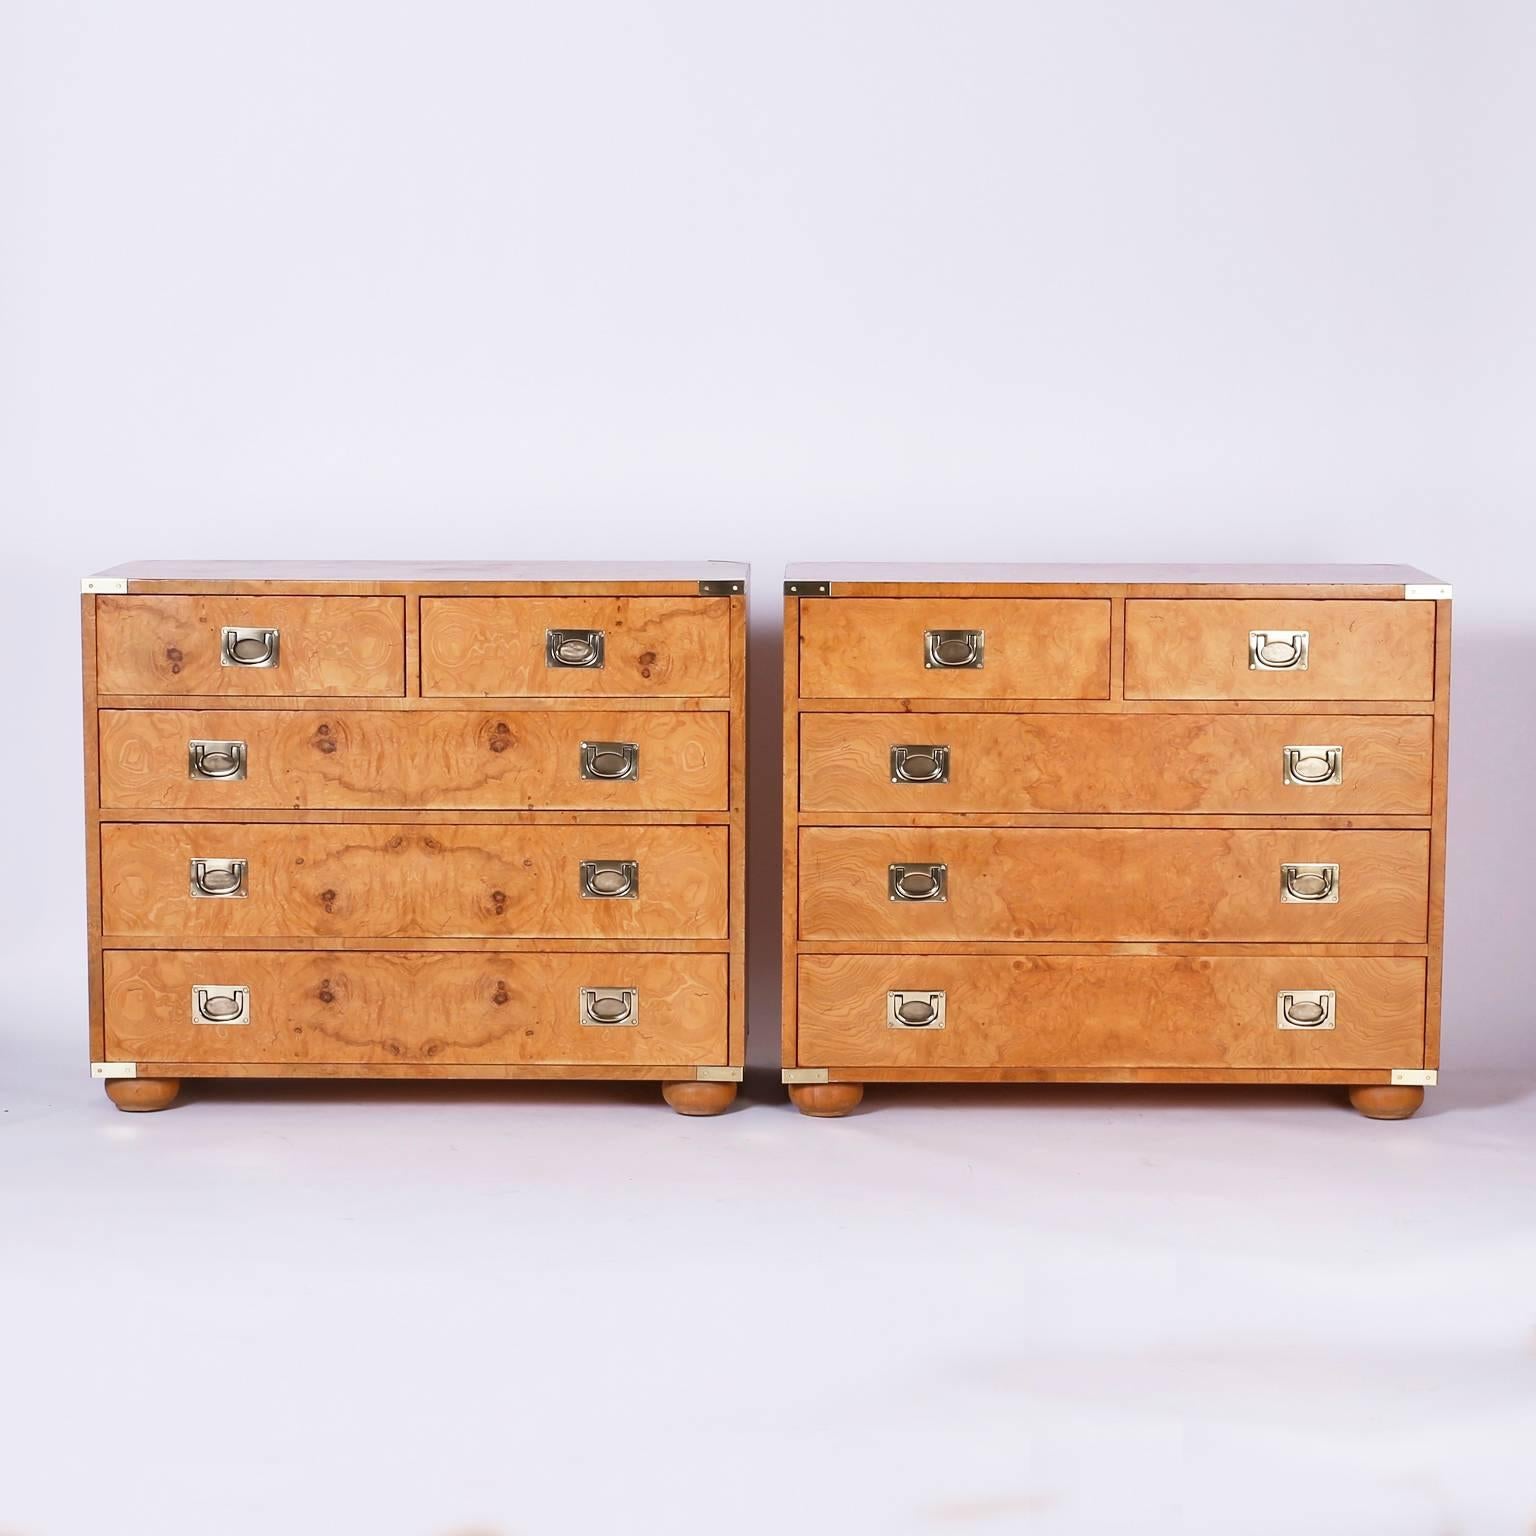 Distinctive pair of campaign style chests with exotic bleached, burled
walnut veneers, campaign style brass hardware and classic bun feet.
Signed Henredon in a drawer.